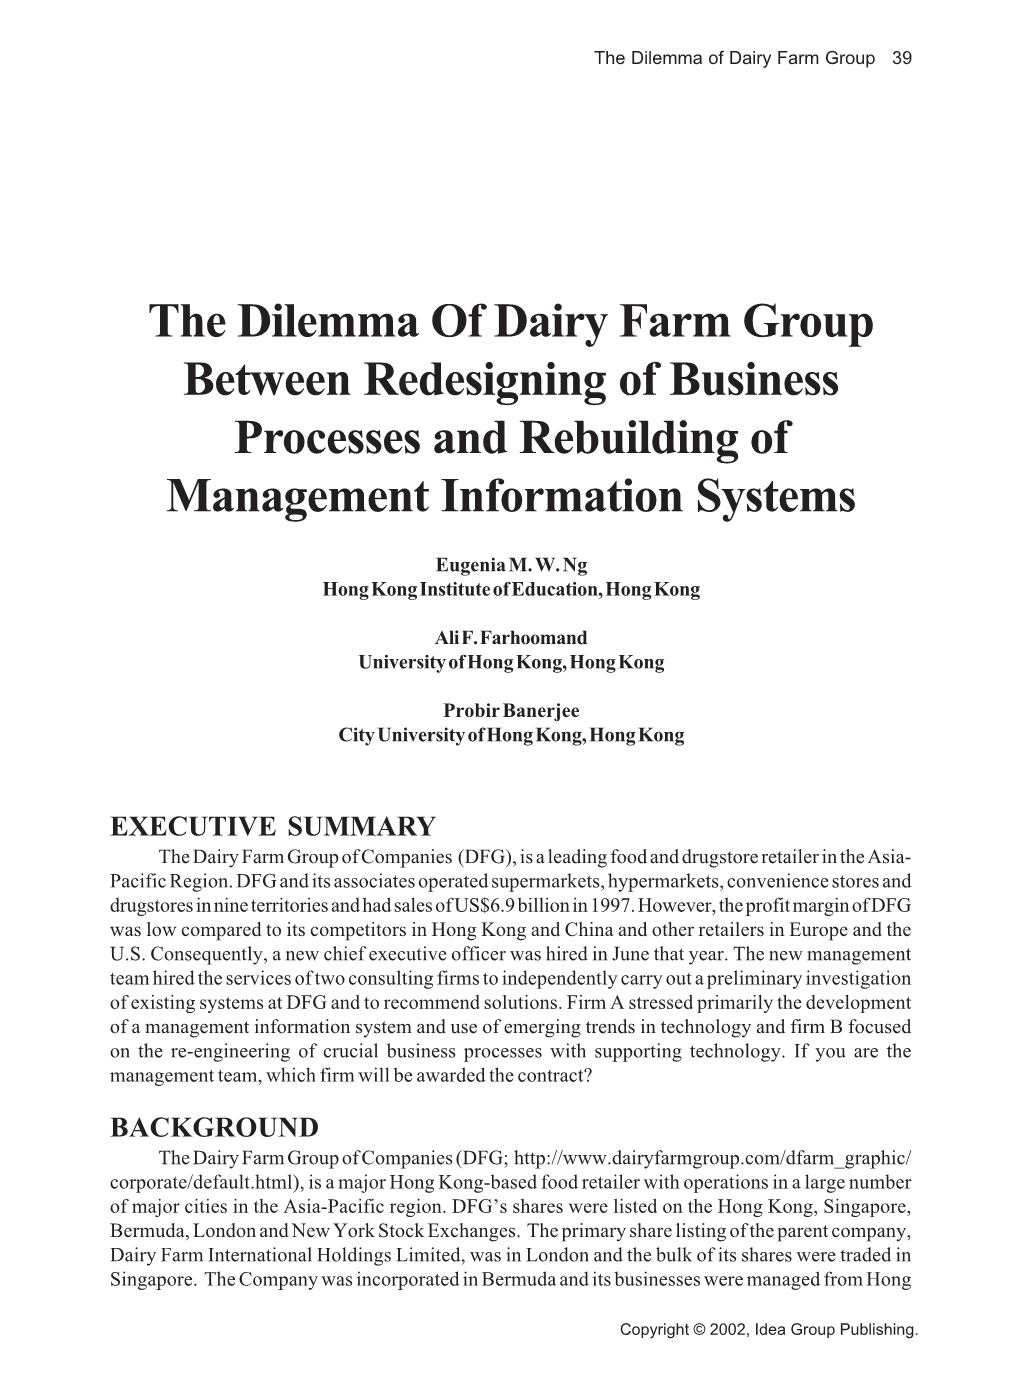 The Dilemma of Dairy Farm Group Between Redesigning of Business Processes and Rebuilding of Management Information Systems